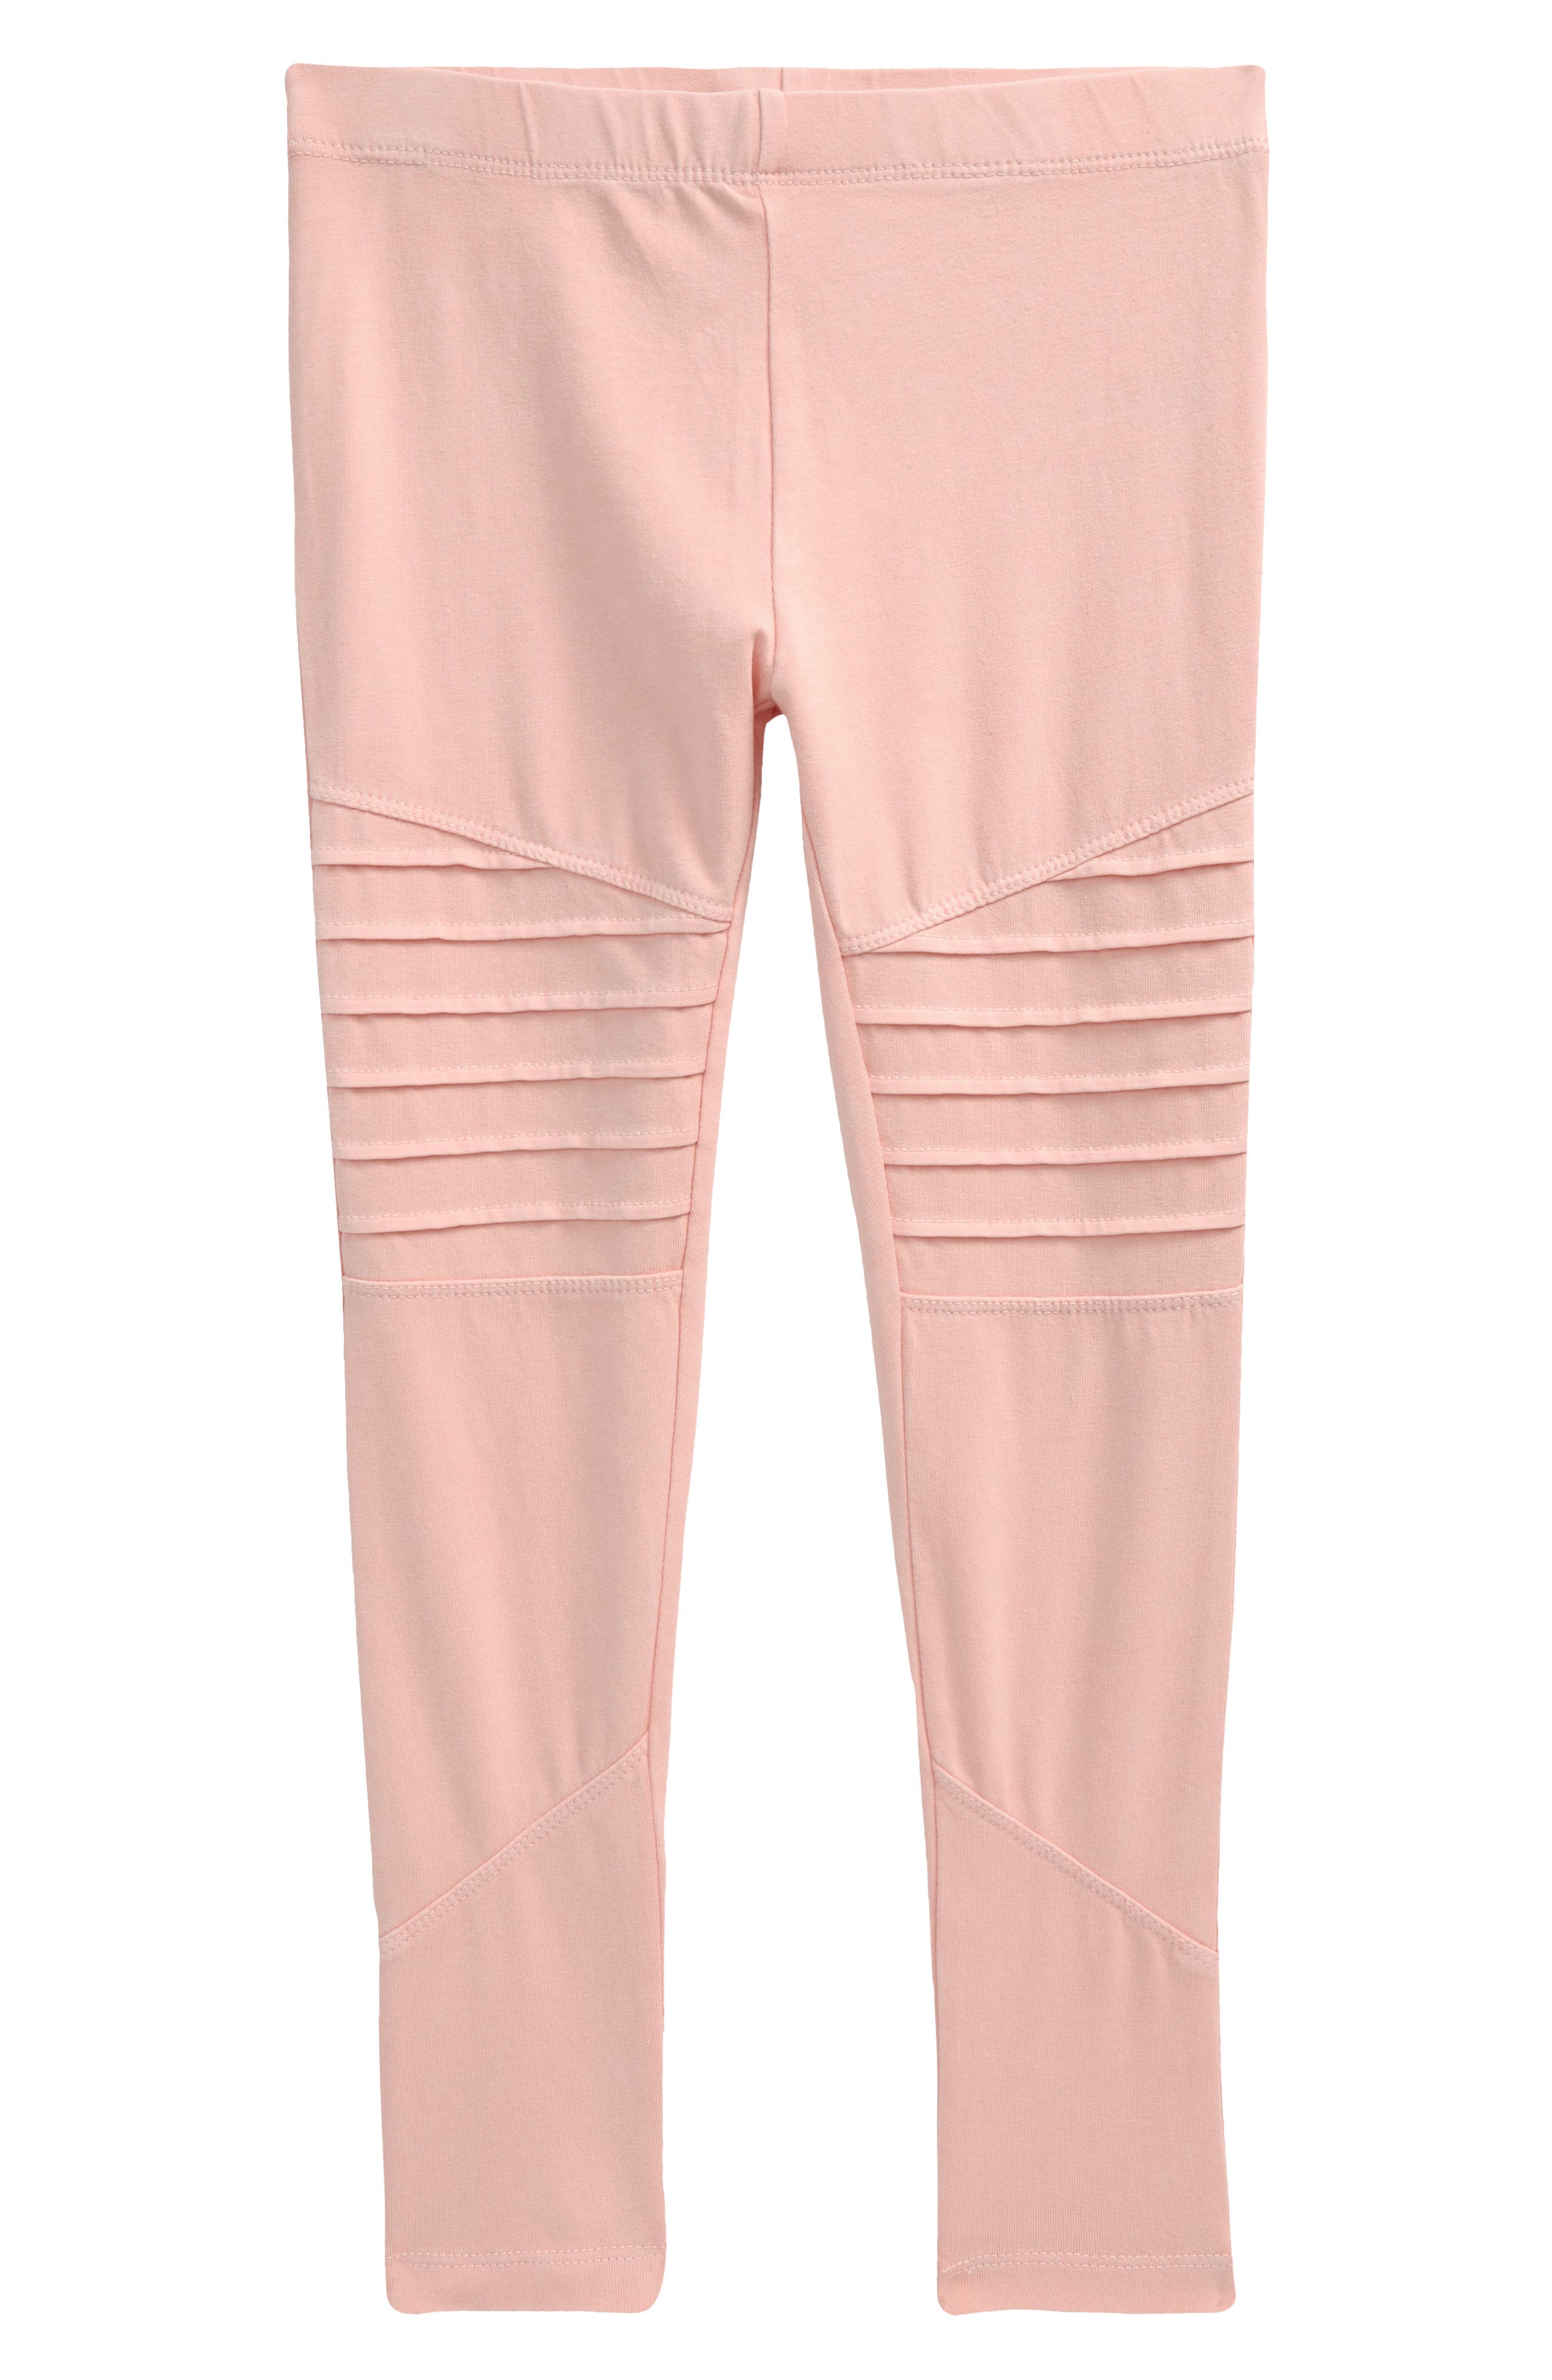 Nordstrom Clothing Pants Stretch Pants Kids Stretch Cotton Hoodie & Pants Set in Pink at Nordstrom 